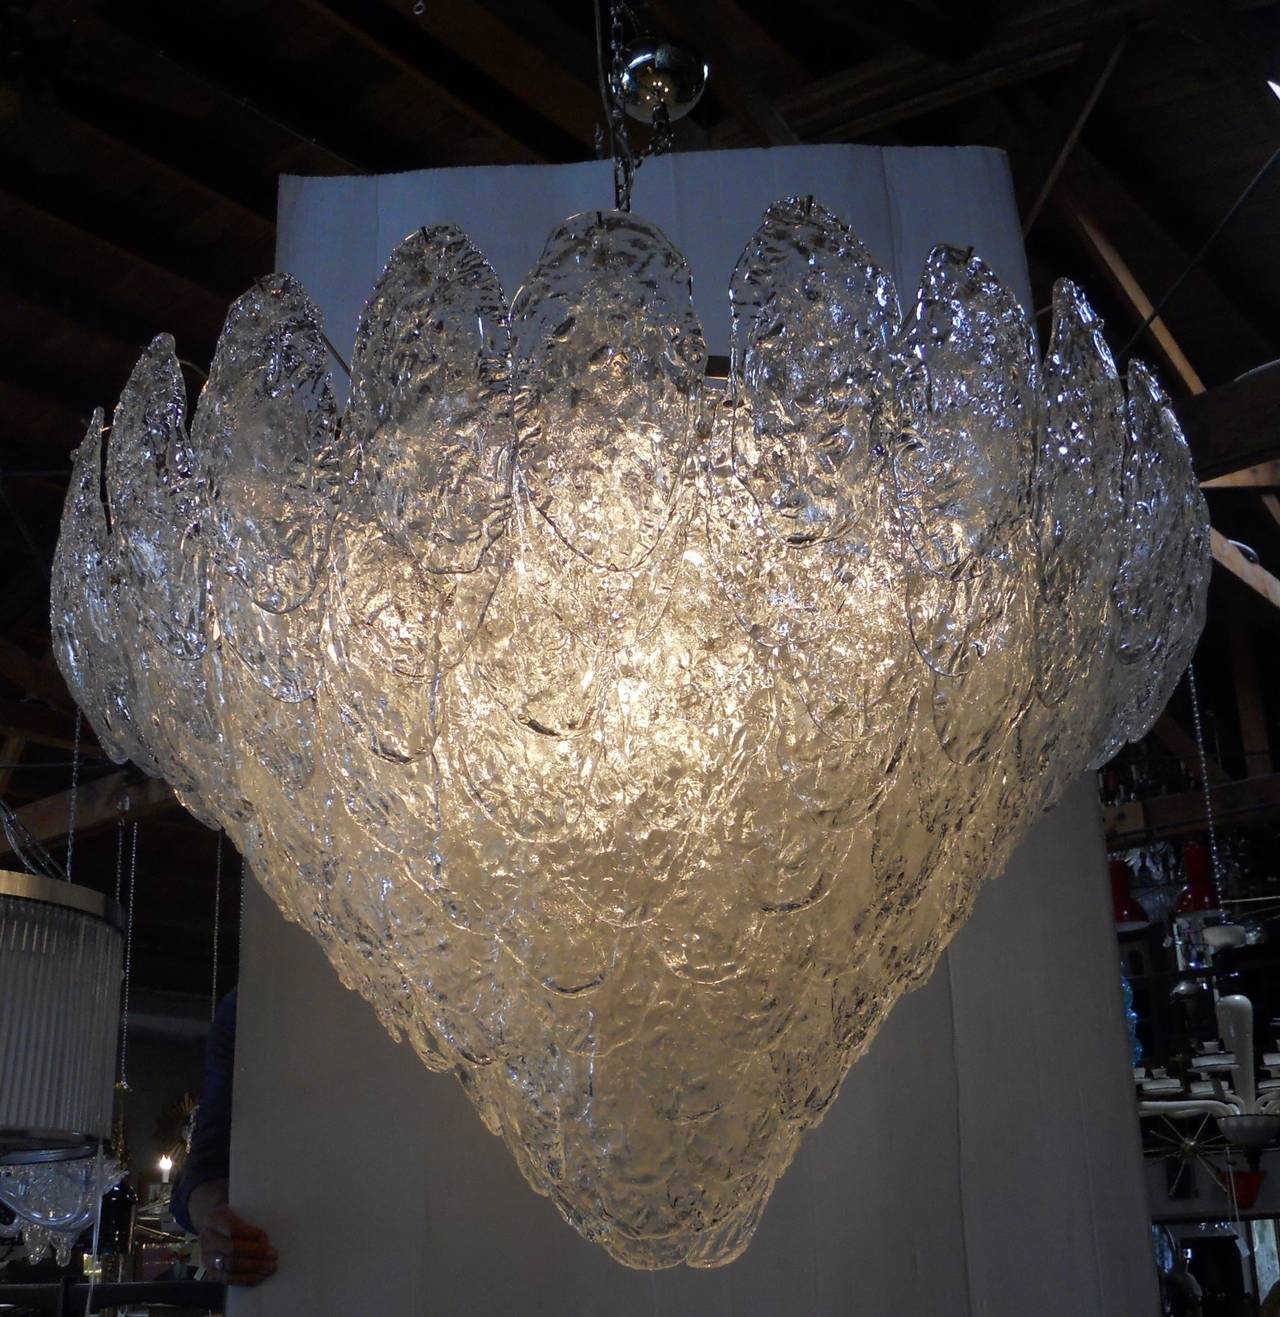 A fabulous Mazzega clear leaf chandelier. The chandelier has 145 Murano glass panels and twenty lights mounted on a chrome frame. Measurement provided is for the fixture only (chain and canopy extra).